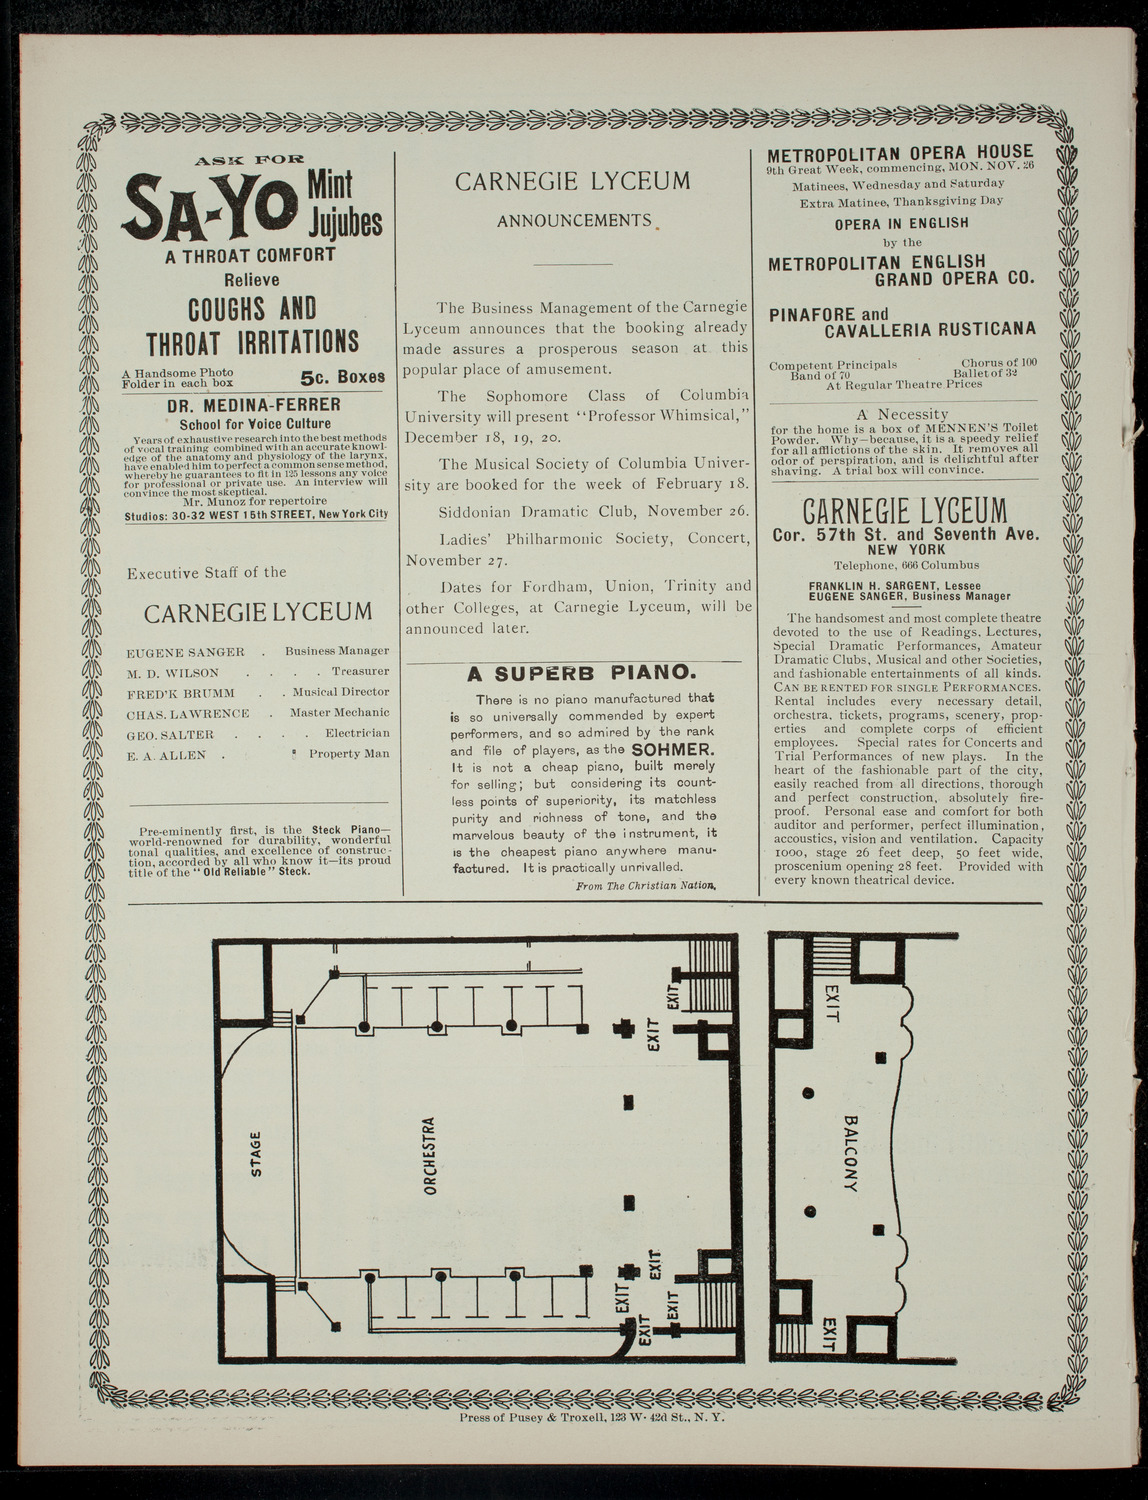 Siddonian Dramatic Club presenting "Ours", November 26, 1900, program page 4